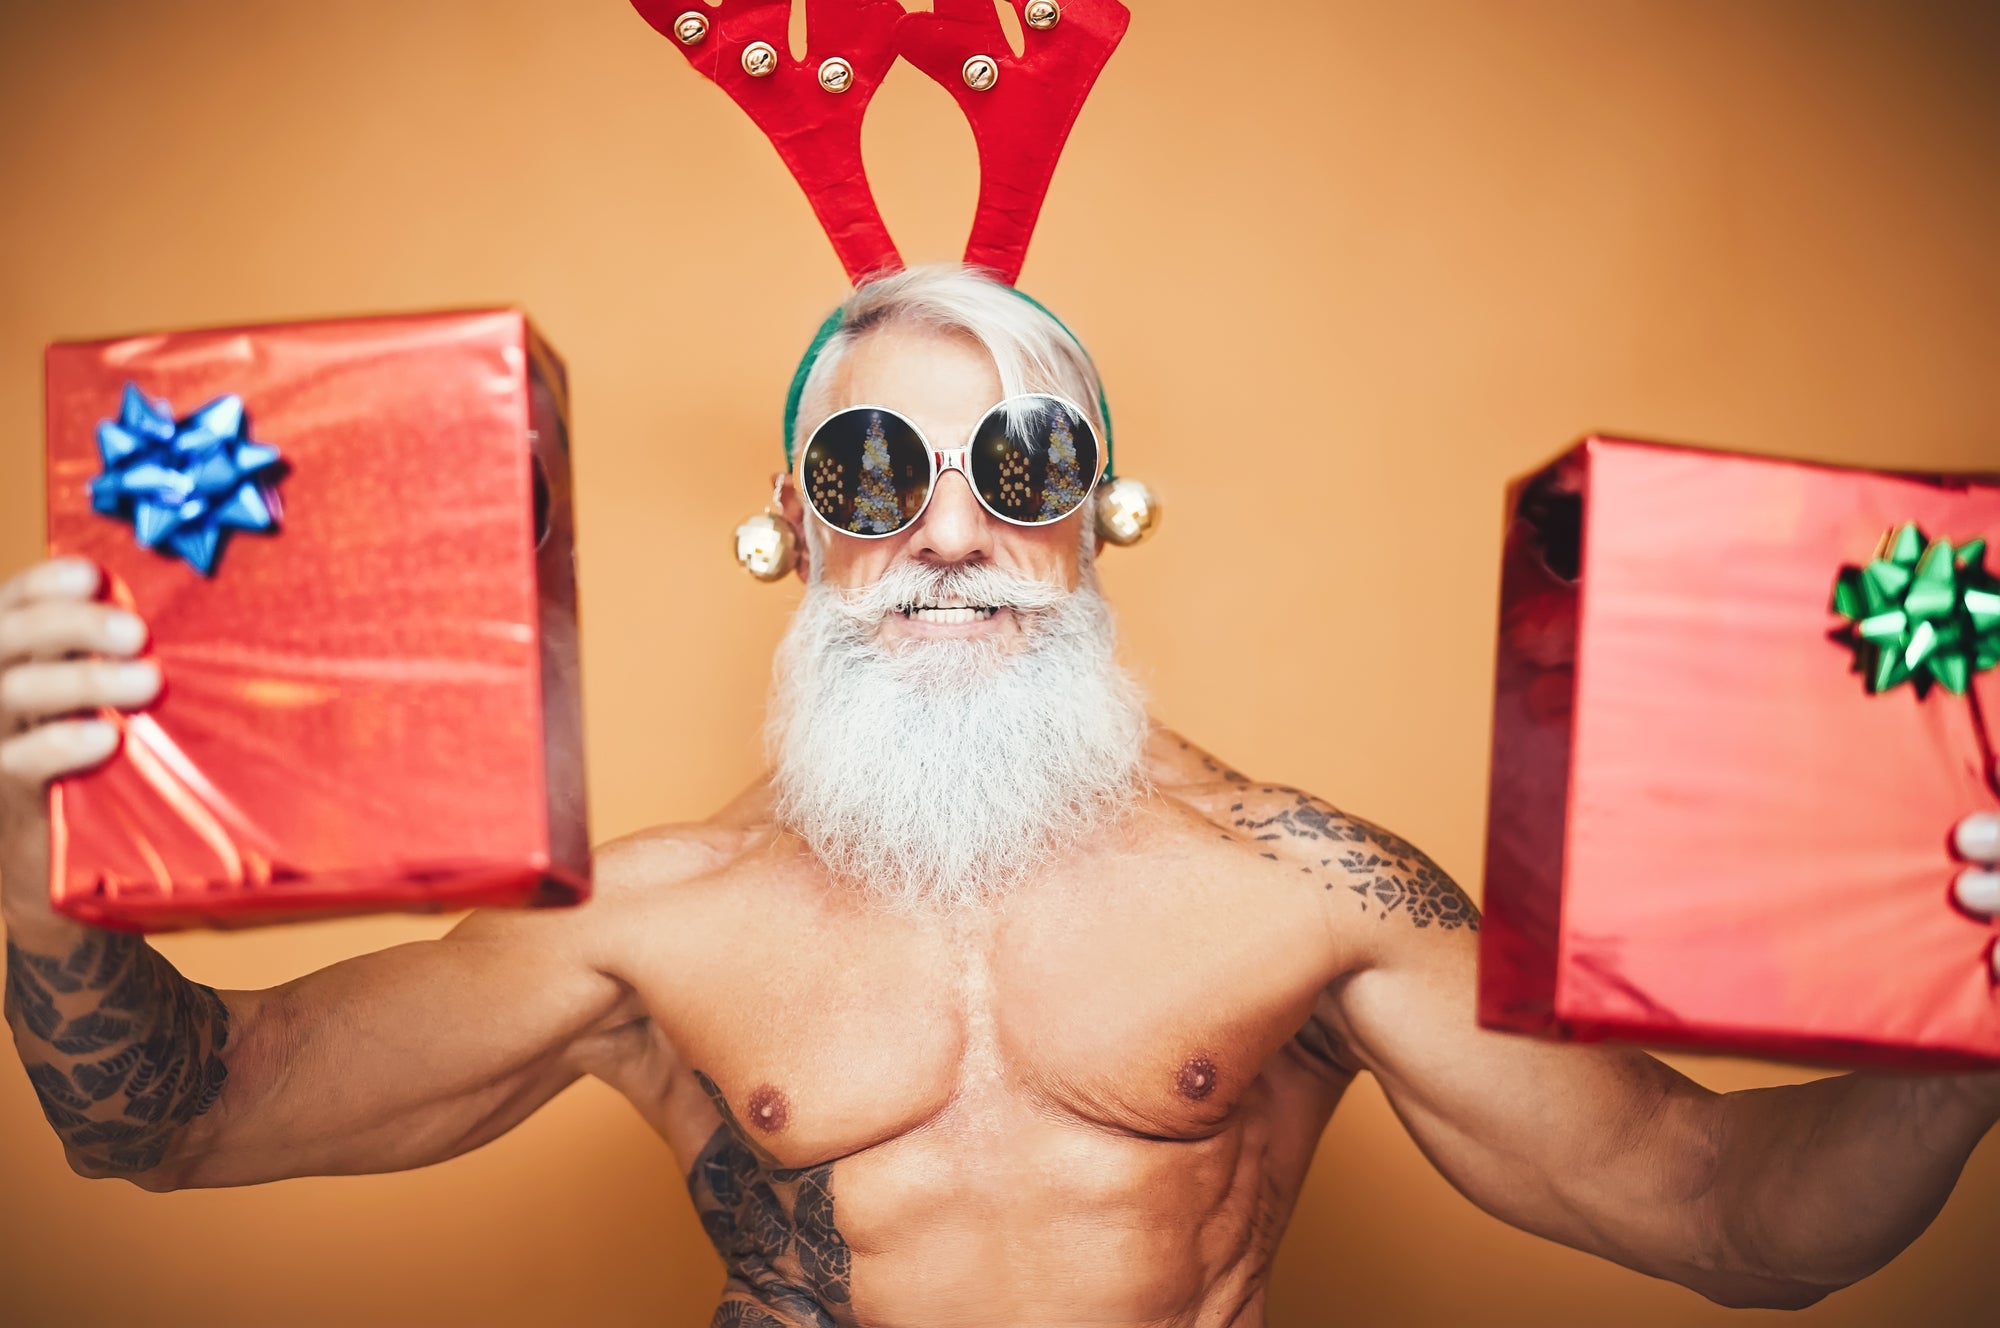 Top 10 Christmas gifts for the calisthenics athlete in your life